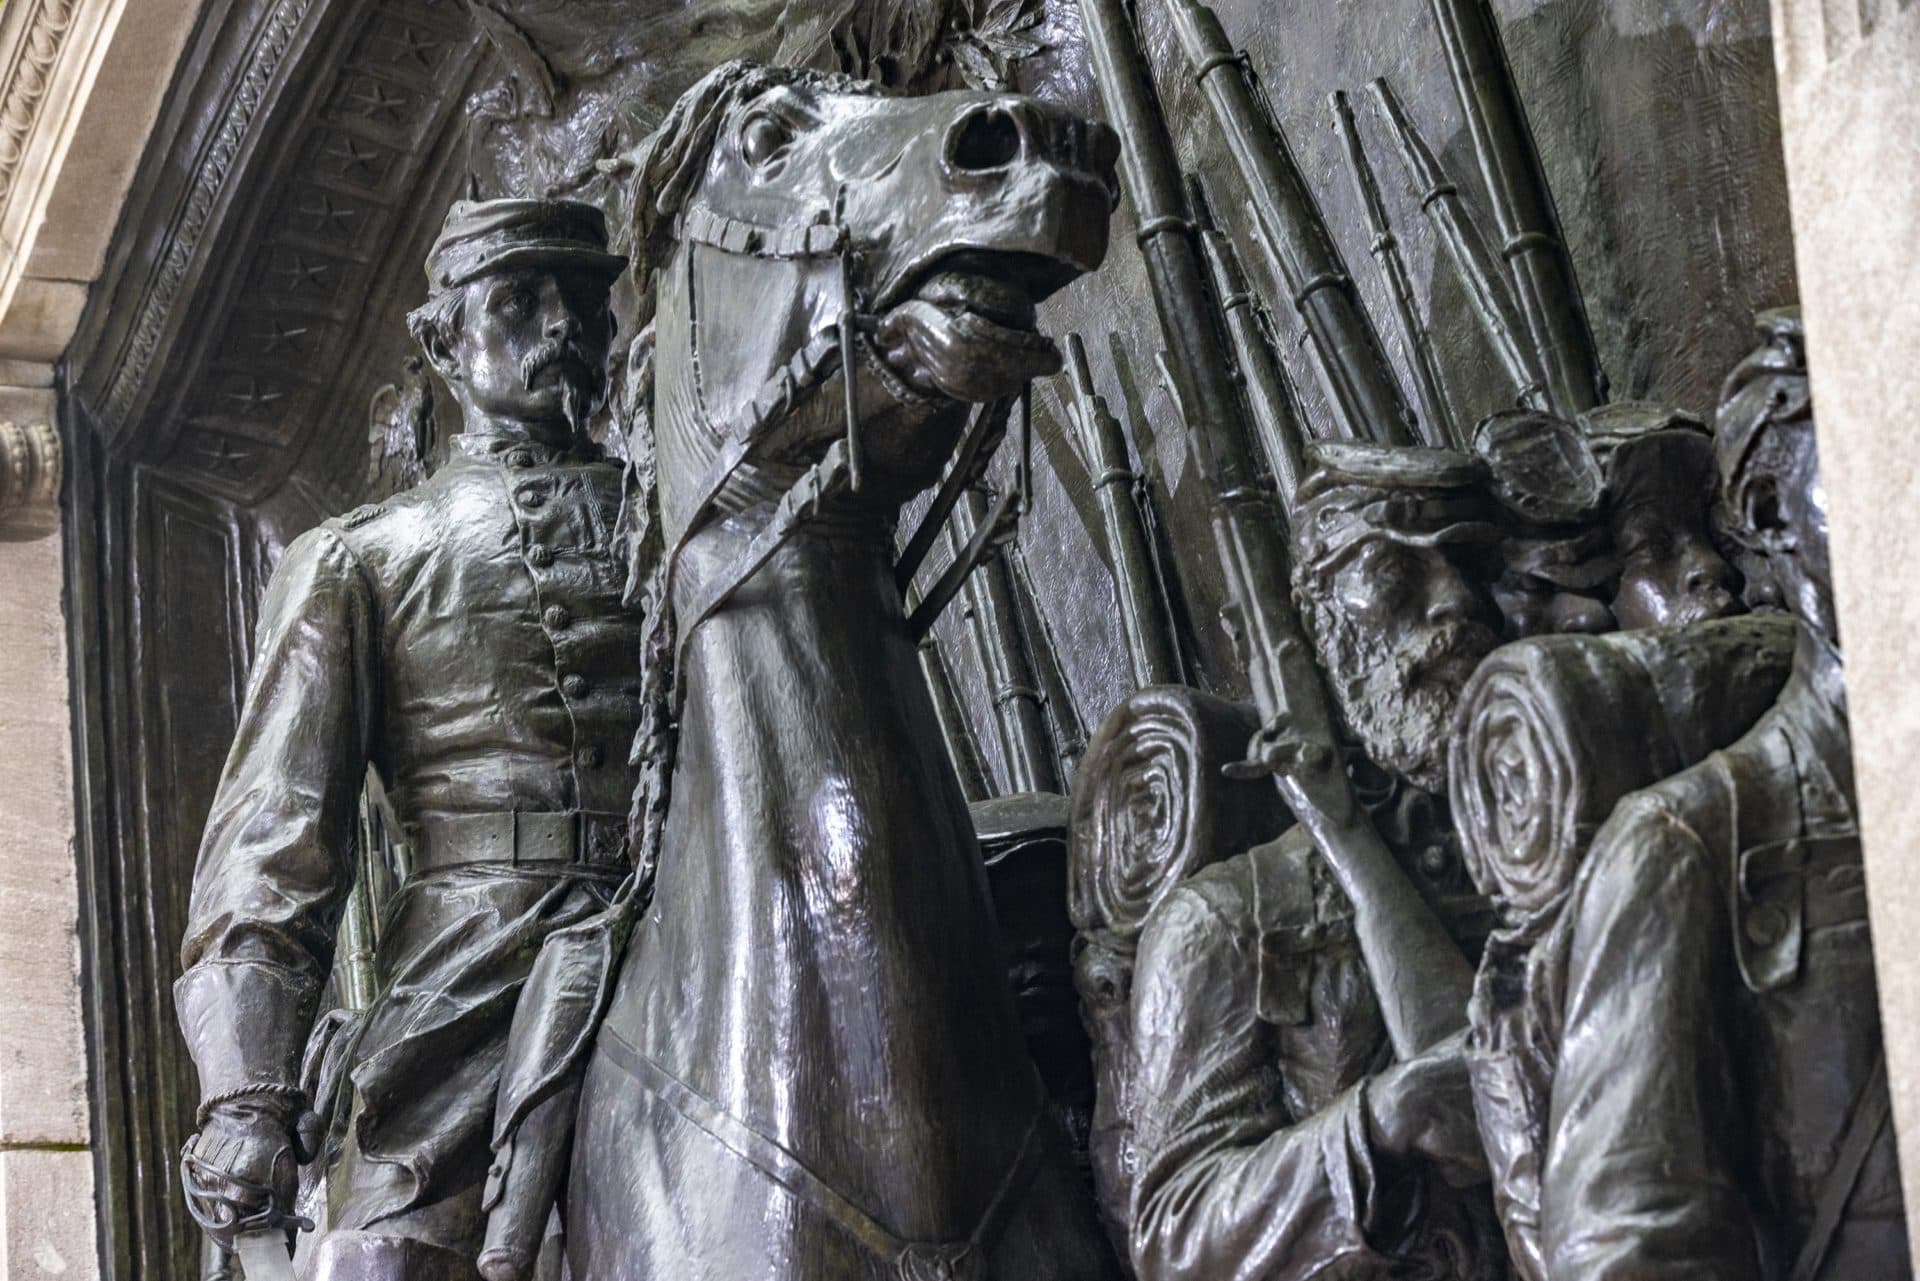 The fully restored Robert Gould Shaw and the 54th Regiment Memorial. (Jesse Costa/WBUR)